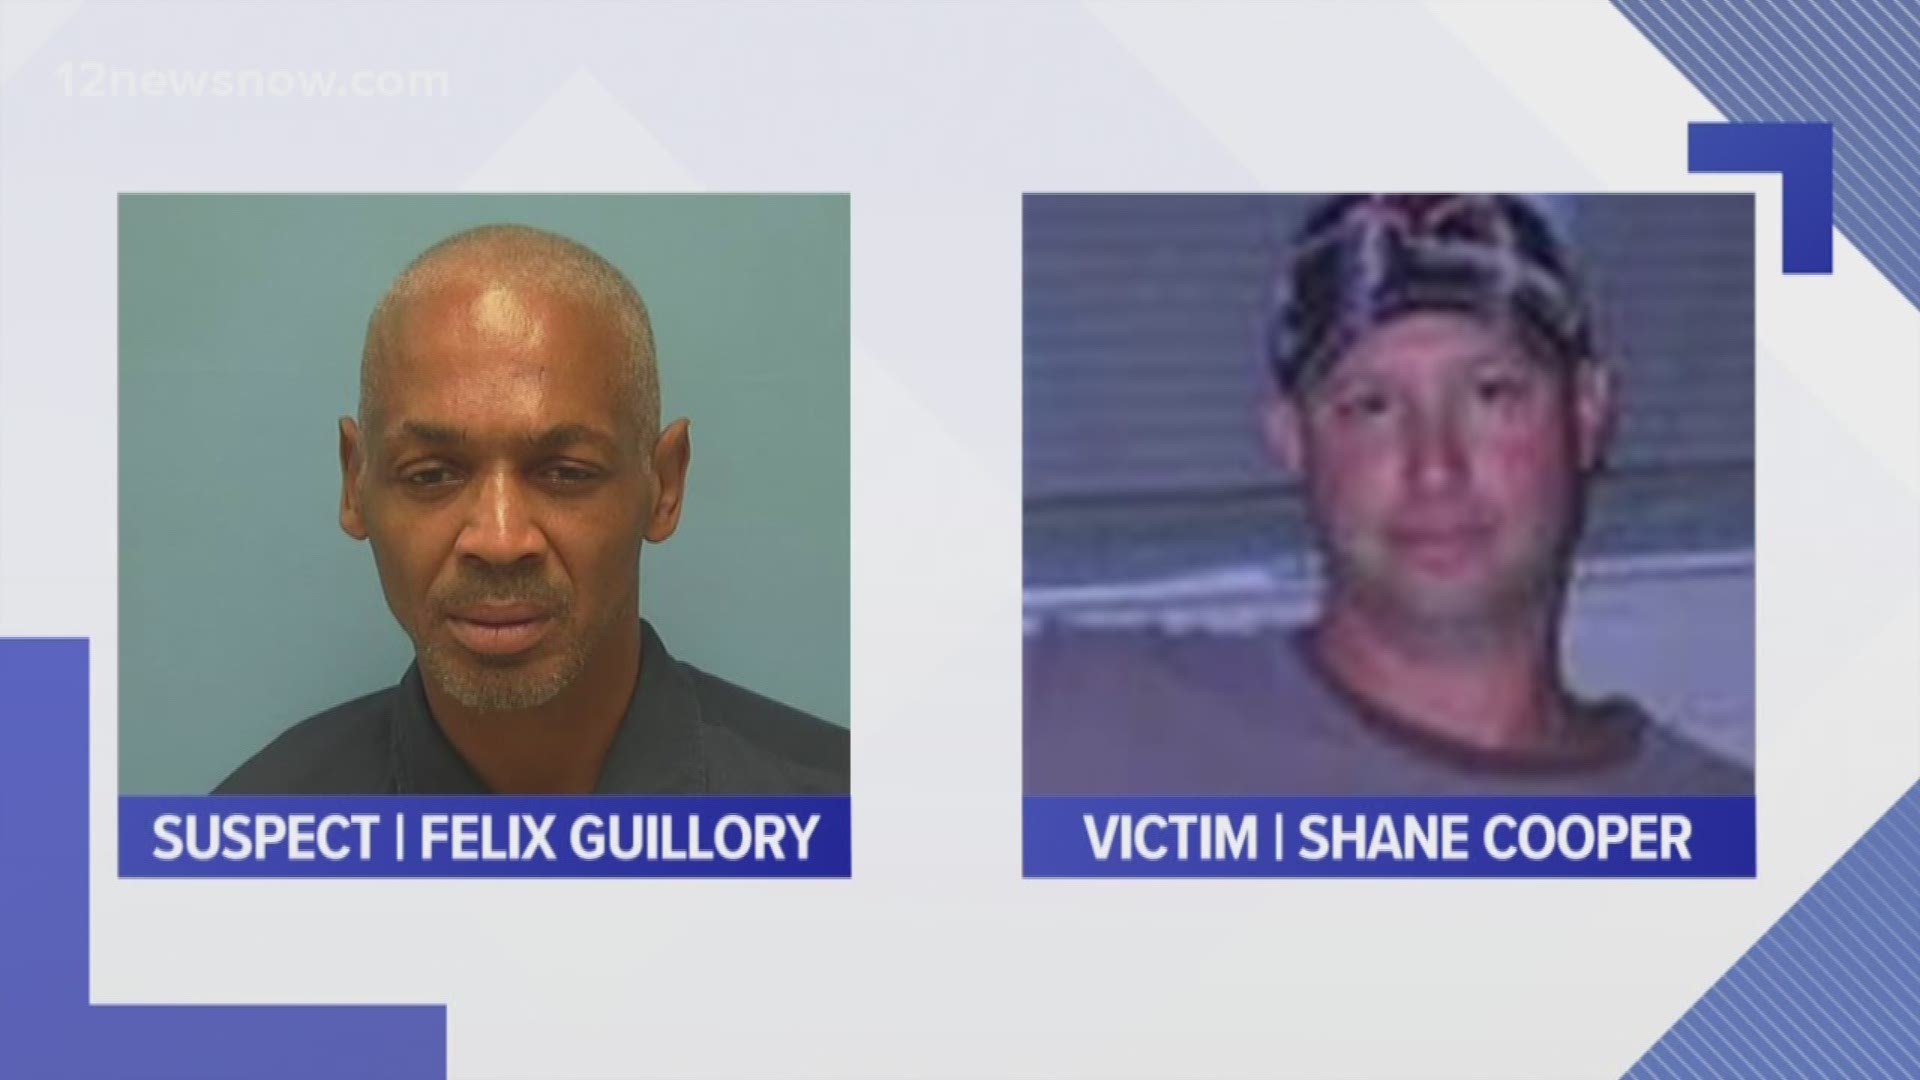 Felix Guillory is accused of killing Shane Cooper in 2016.